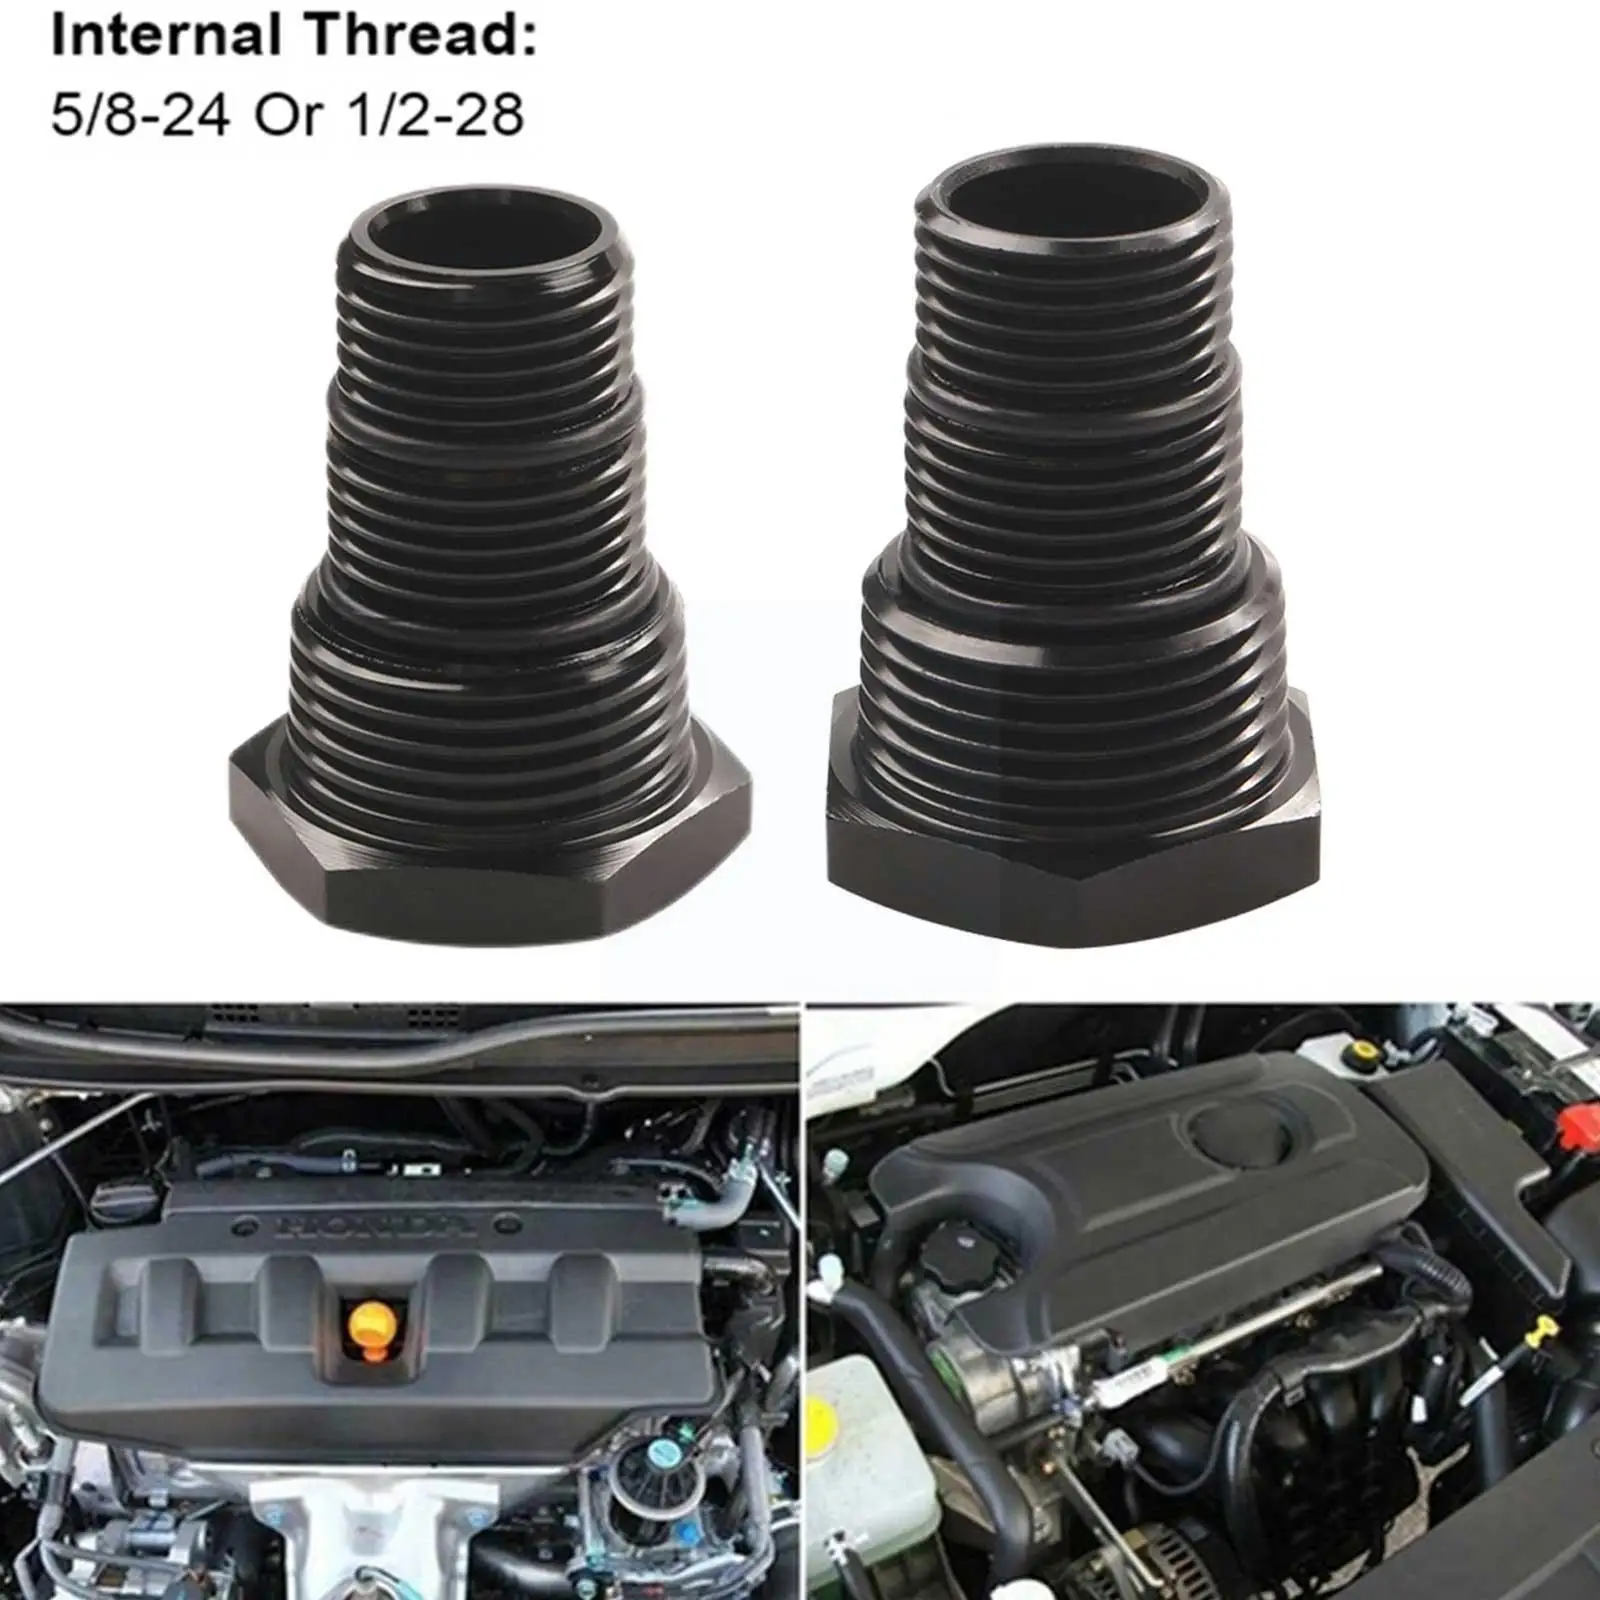 

Oil Filter Threaded Adapter Anodized Car Modification 3/4 13/16"-16 Accessories Npt To Auto 5/8"-24 Or 1/2"-28 3/4"-16 G8b2